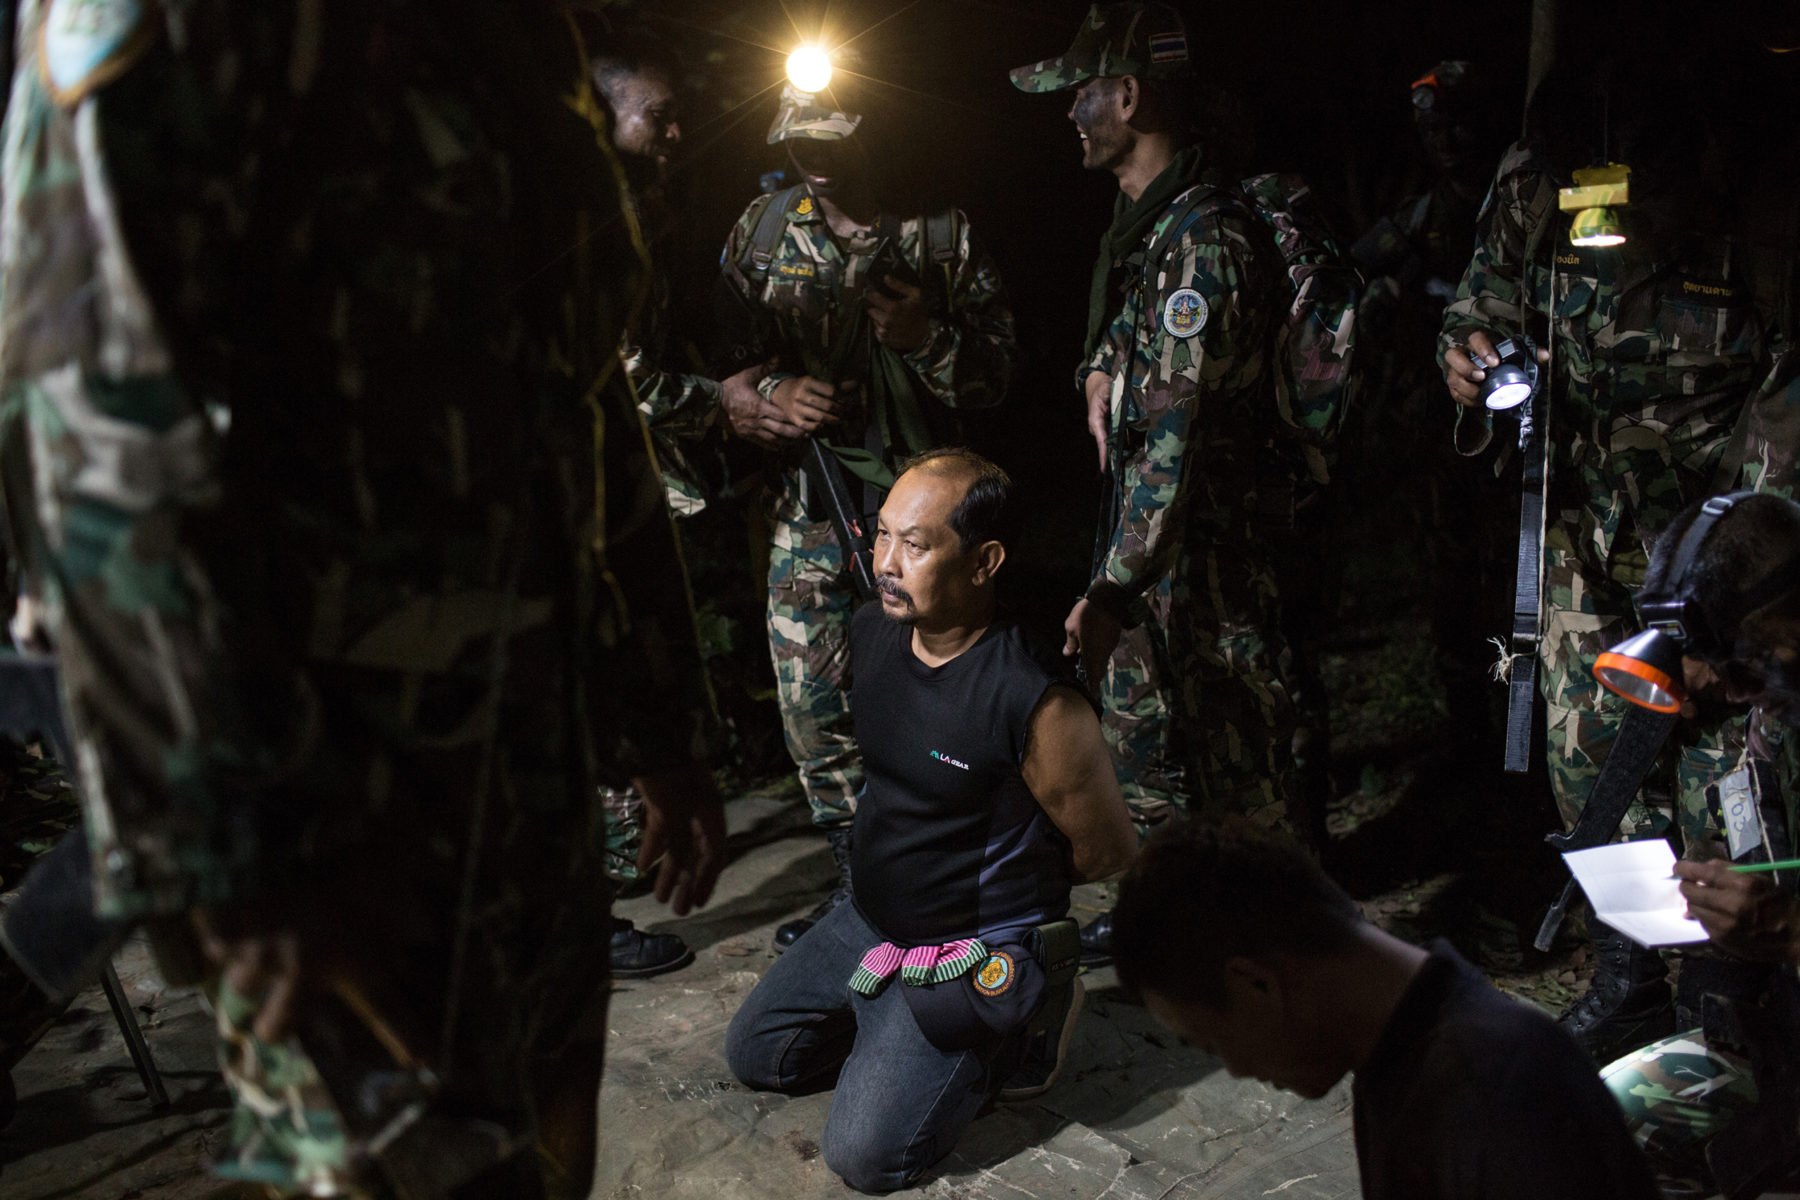 New recruits take part in a ranger training camp in the Ta Phraya National Park. The training includes practising arrests of illegal loggers, who can net US0 per load of Siamese rosewood. (Image: Luke Duggleby)